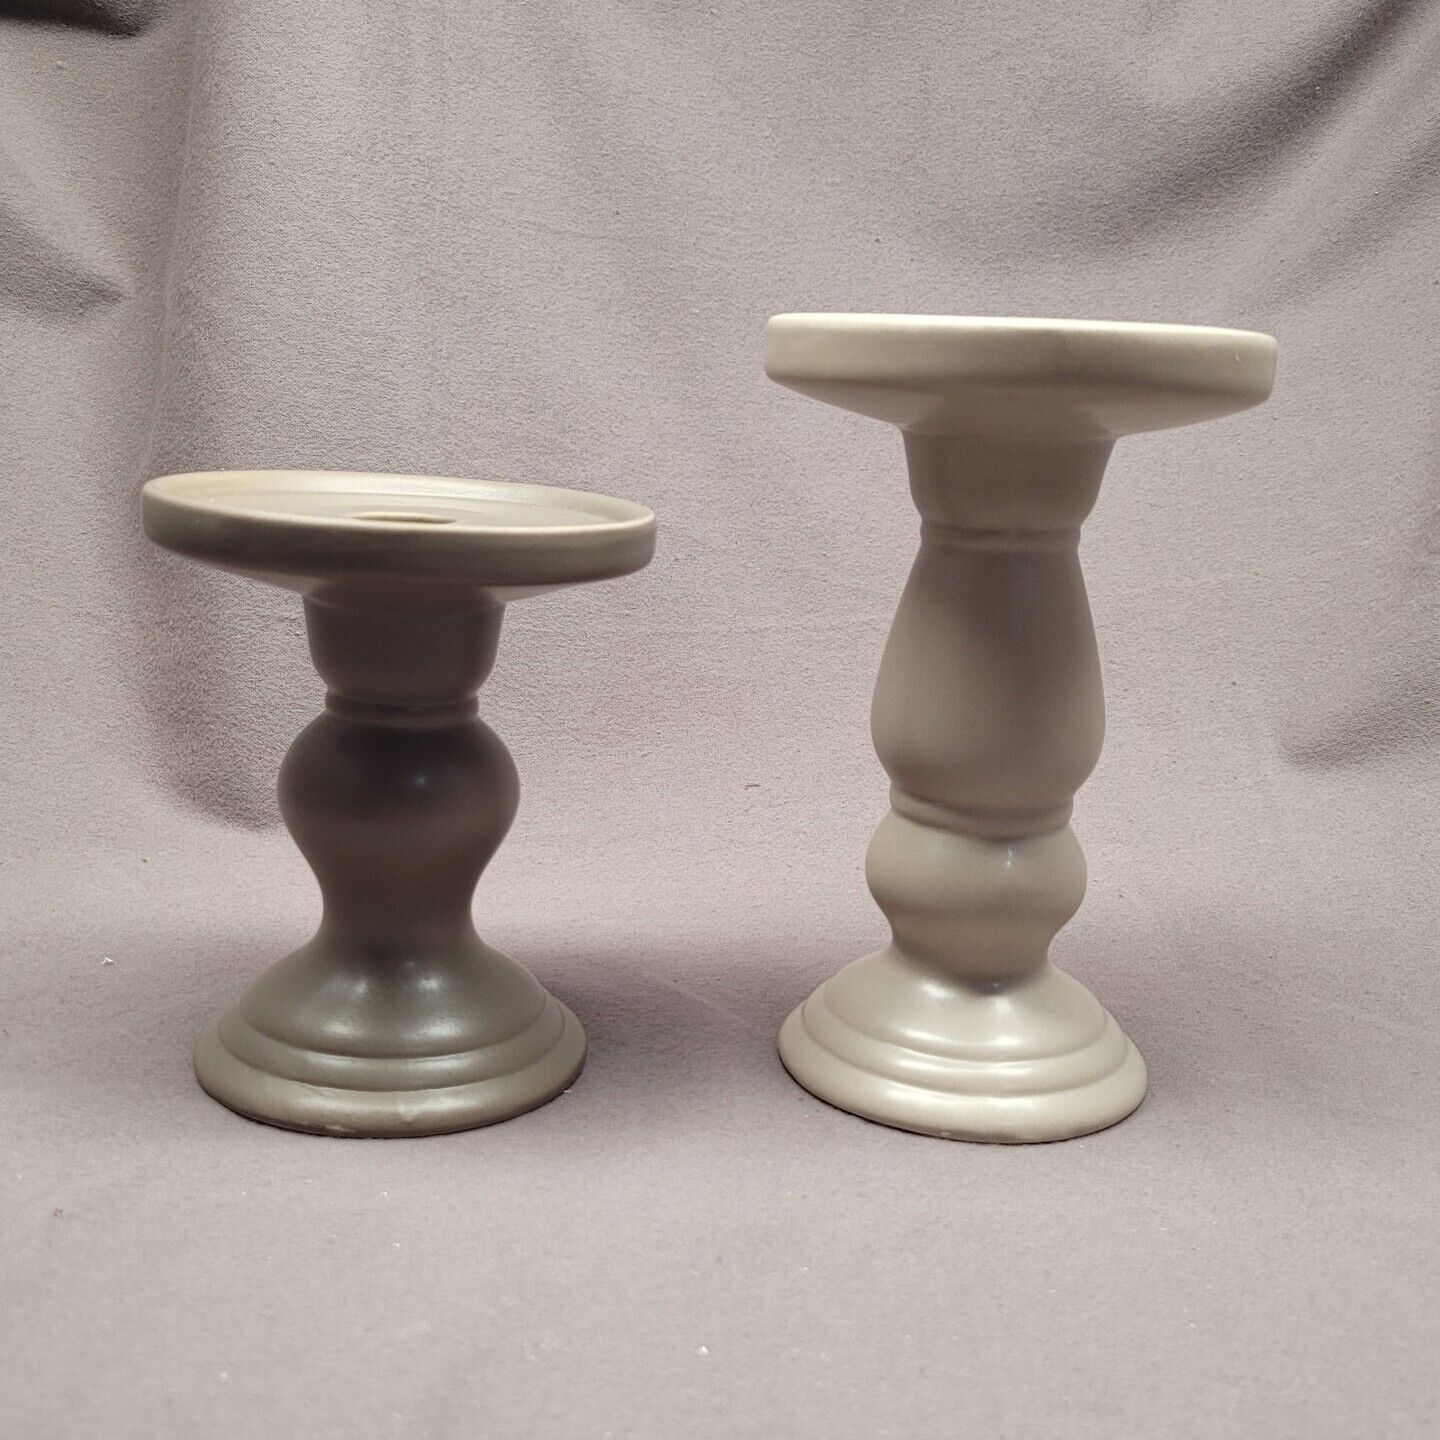 2 In 1 Ceramic Candle Or Candlestick Holders Set Of 2 Neutral Avon Winter soft 